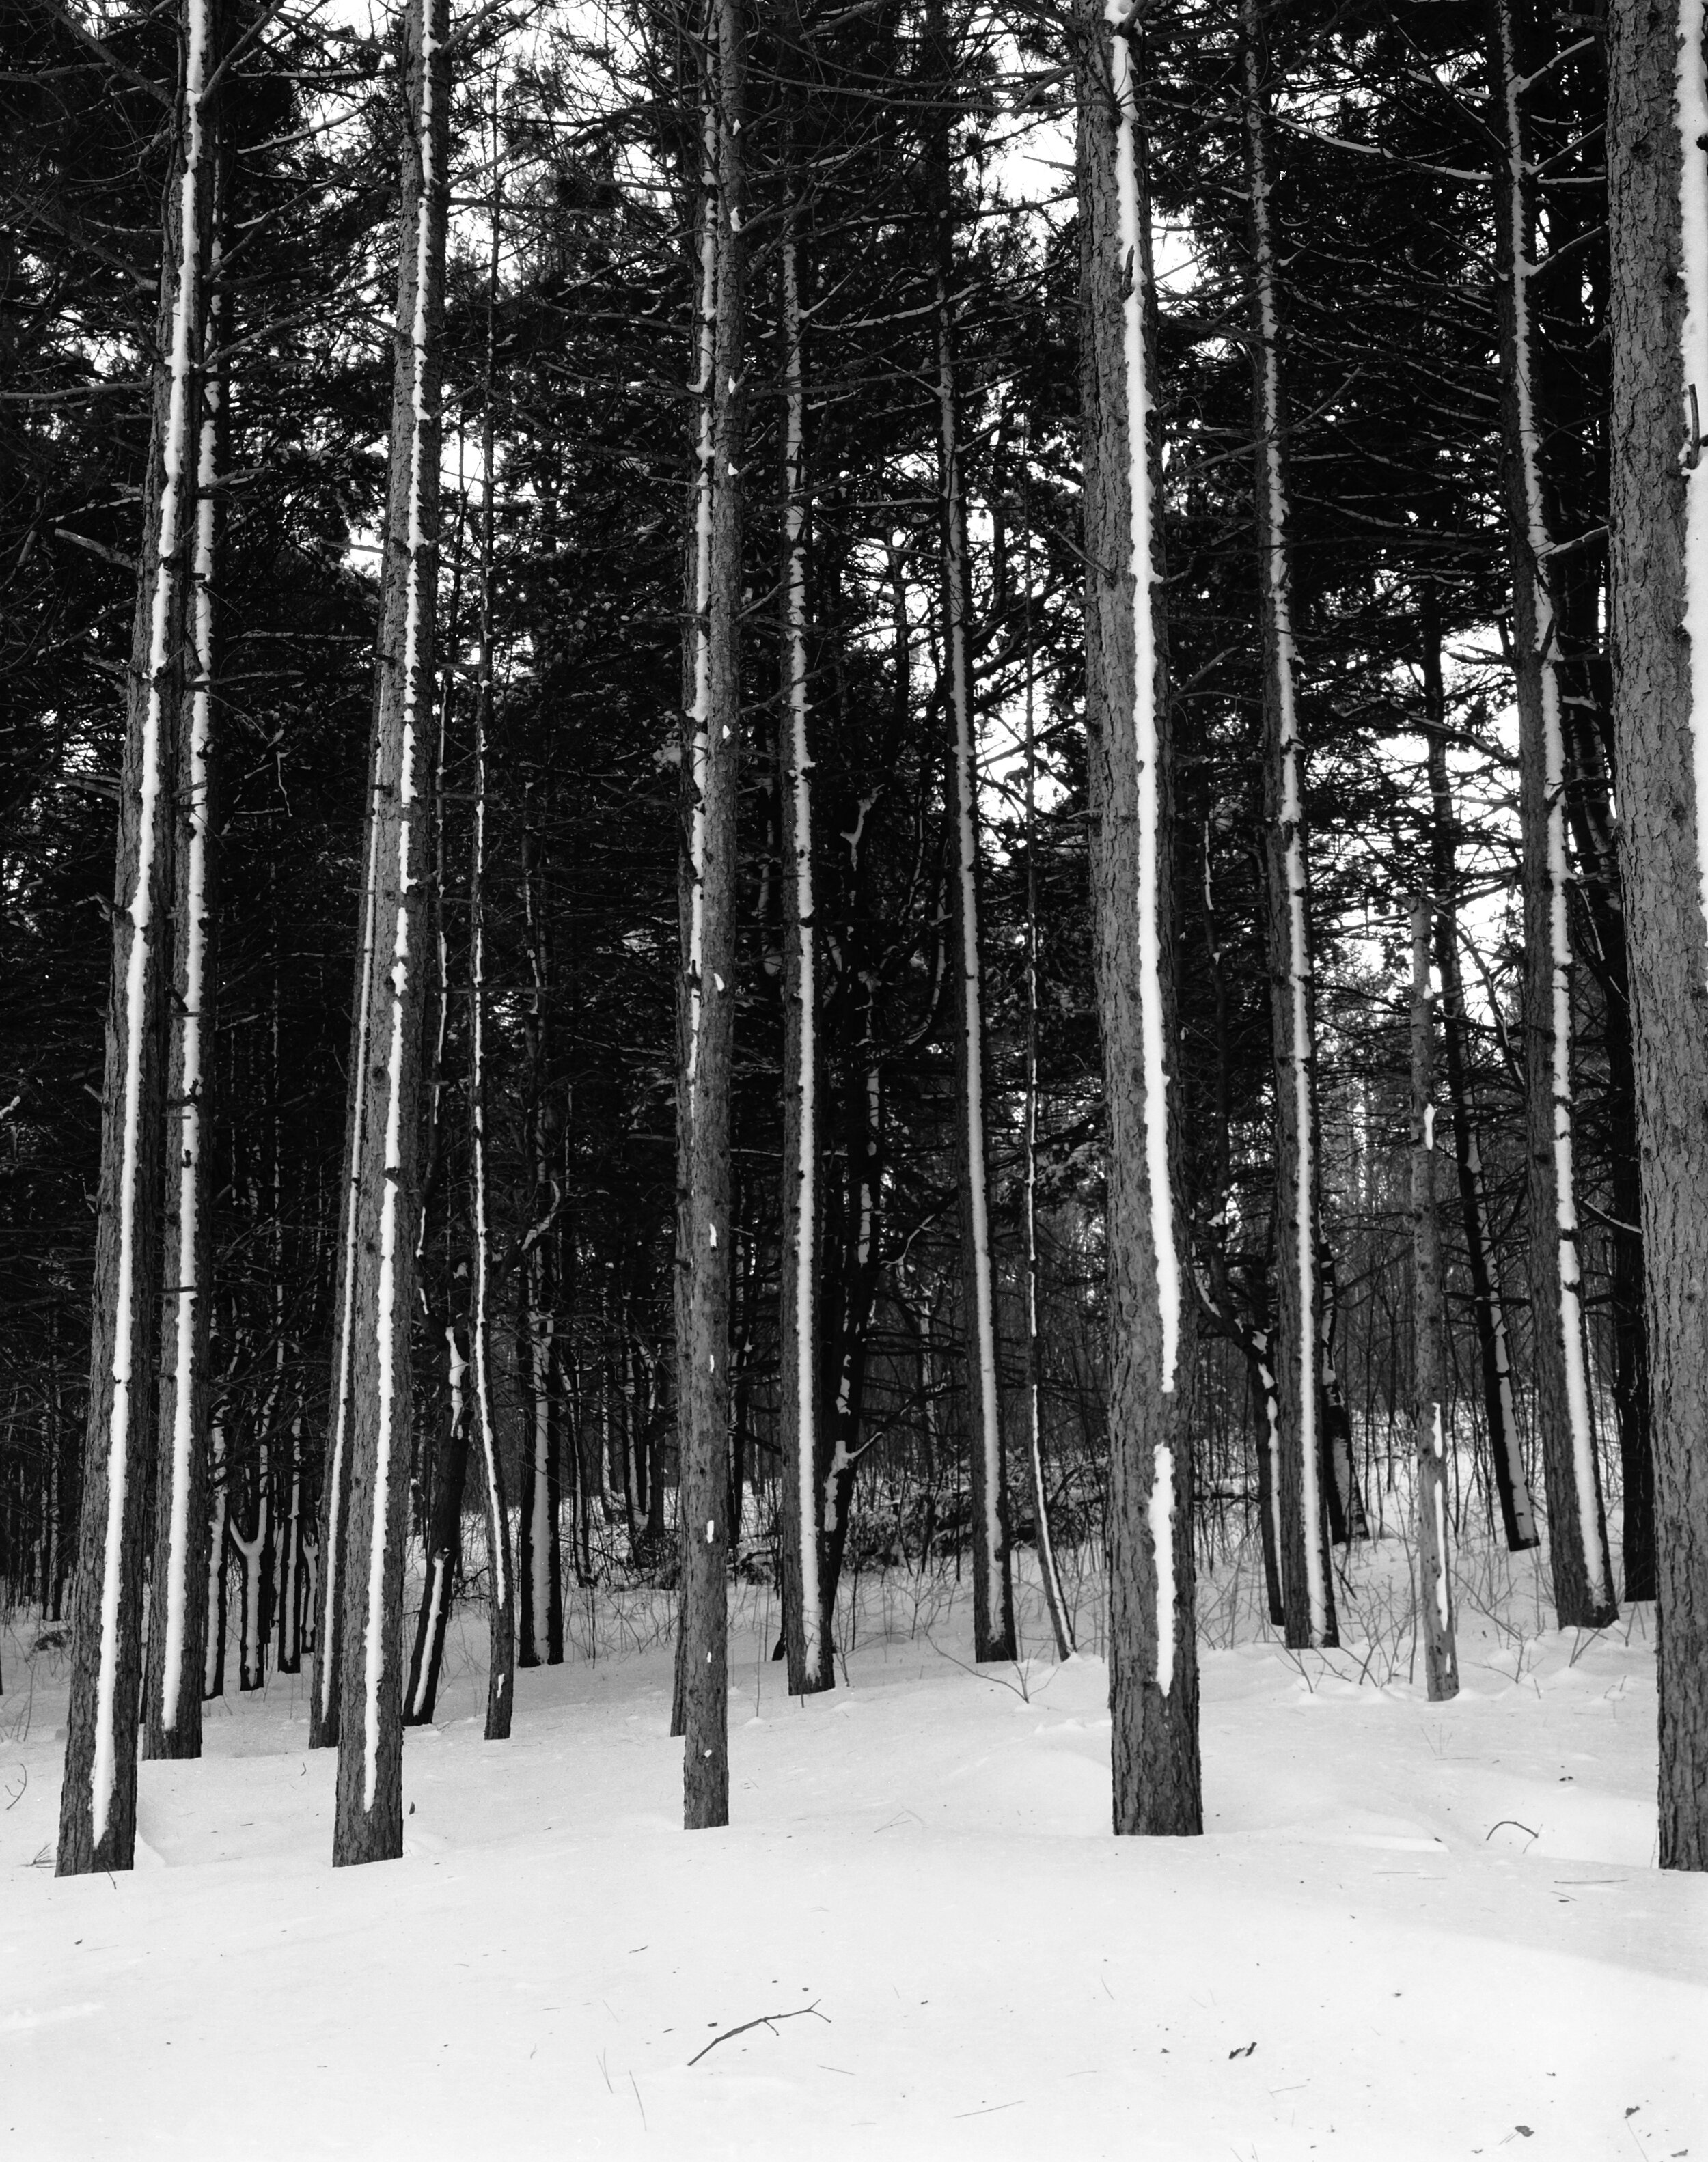 Snow & Pines Leicester, MA (date unknown)